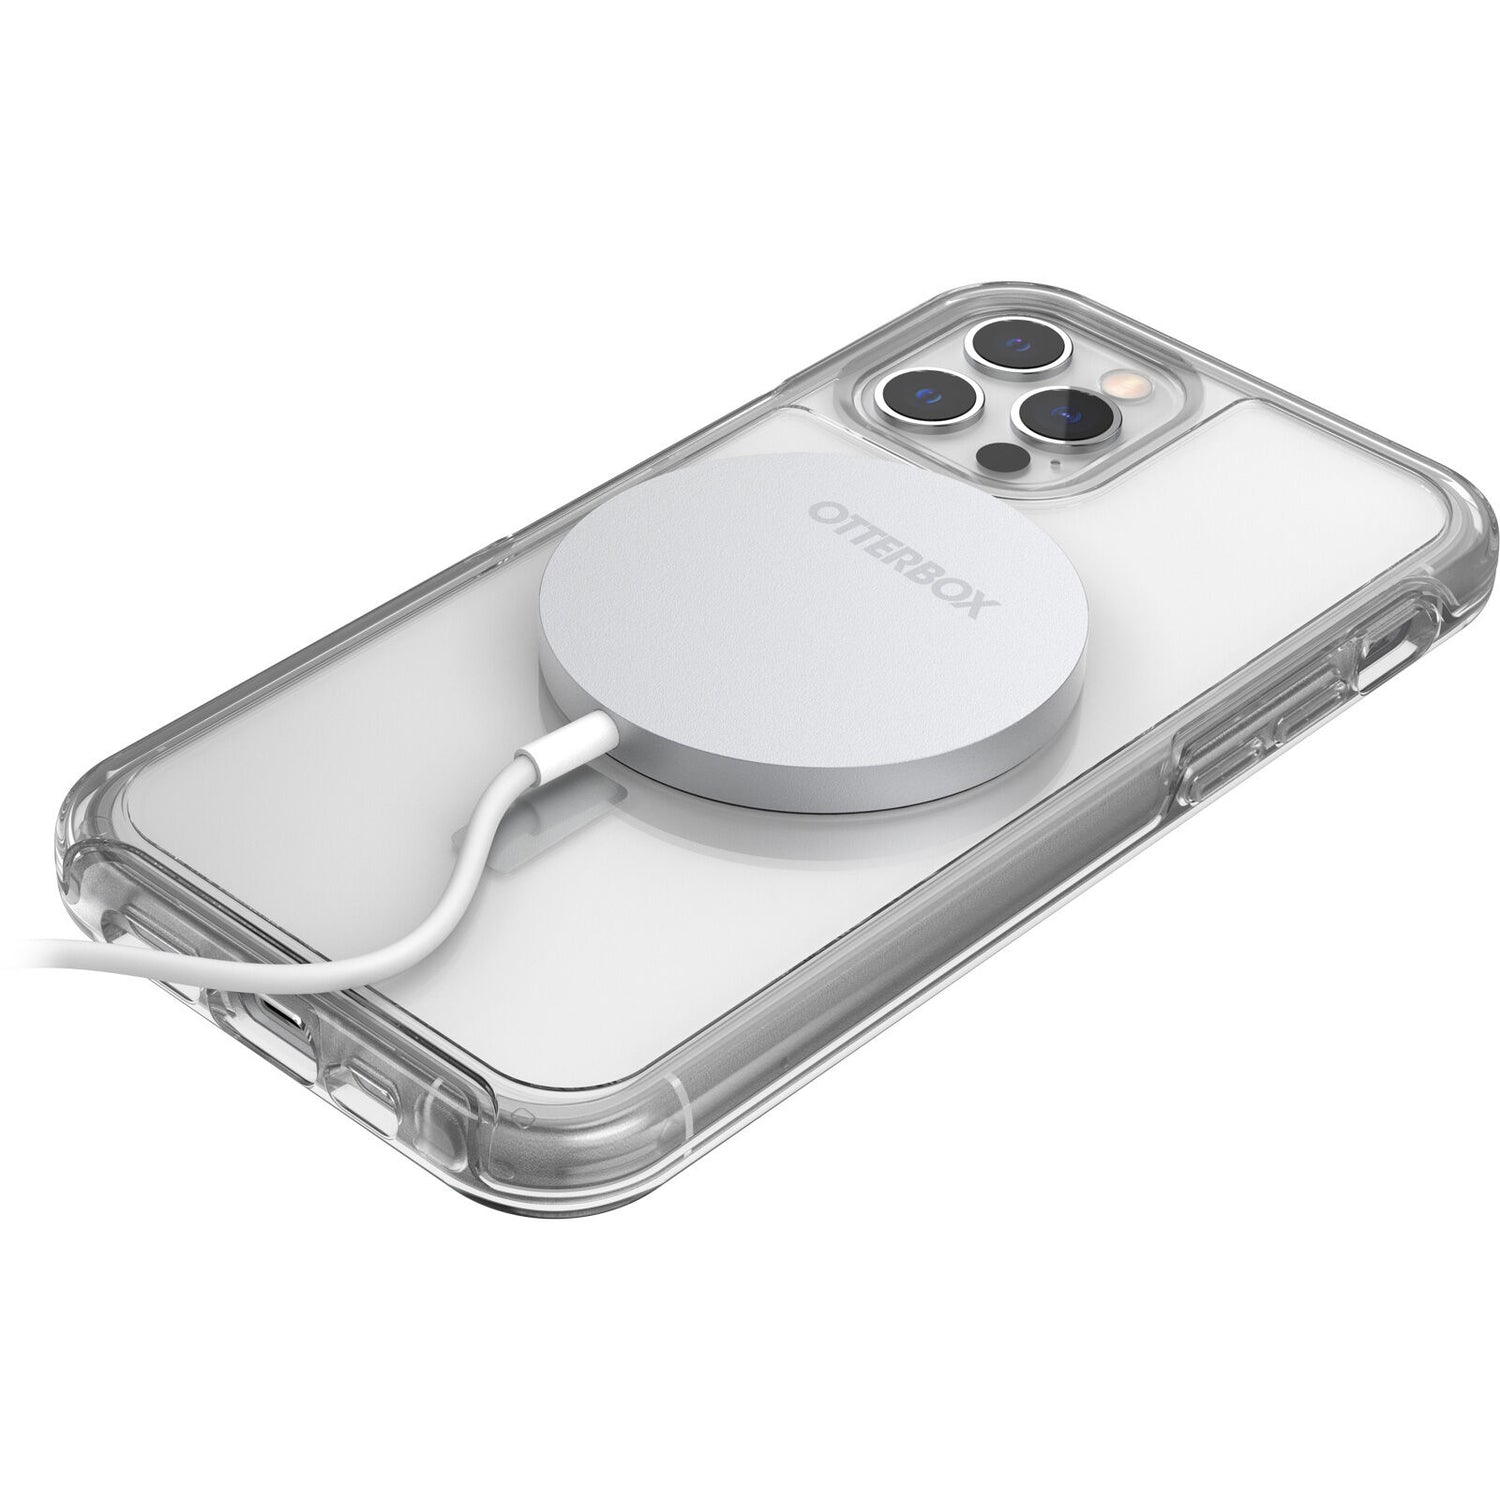 OtterBox Charging Pad for MagSafe, 78-80632 - Lucid Dreamer (White/Silver) (New)